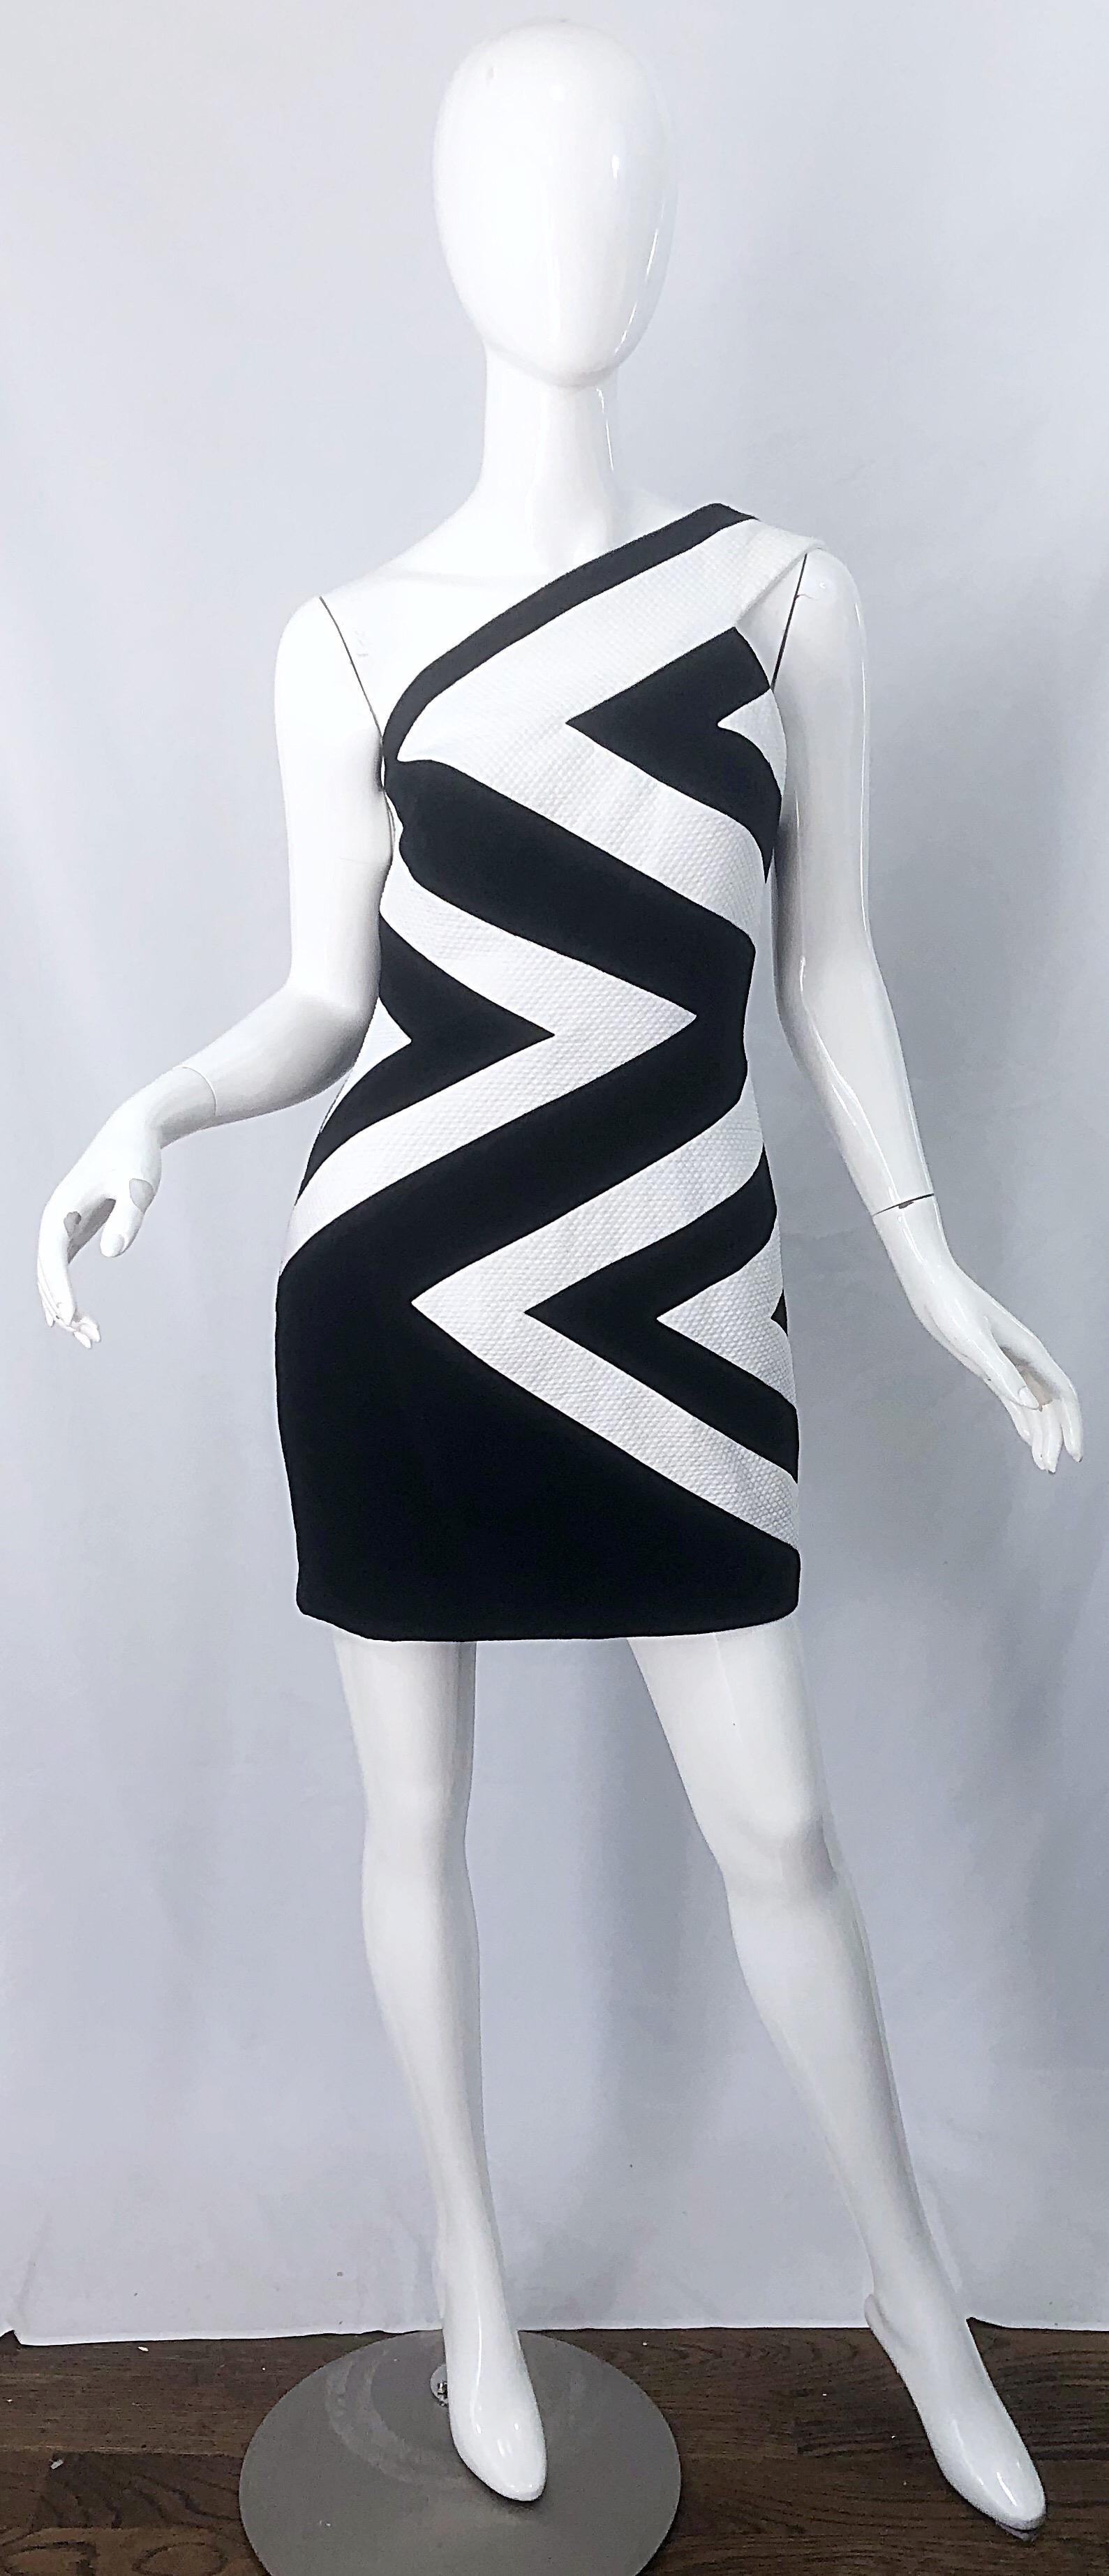 Sexy 1990s LINDA SEGAL black and white cotton picque one shoulder vintage mini dress ! Features a flattering zig zag print on the front with a solid black back. Linda Segal designed many pieces for Fran Drescher's character on the hit show, 